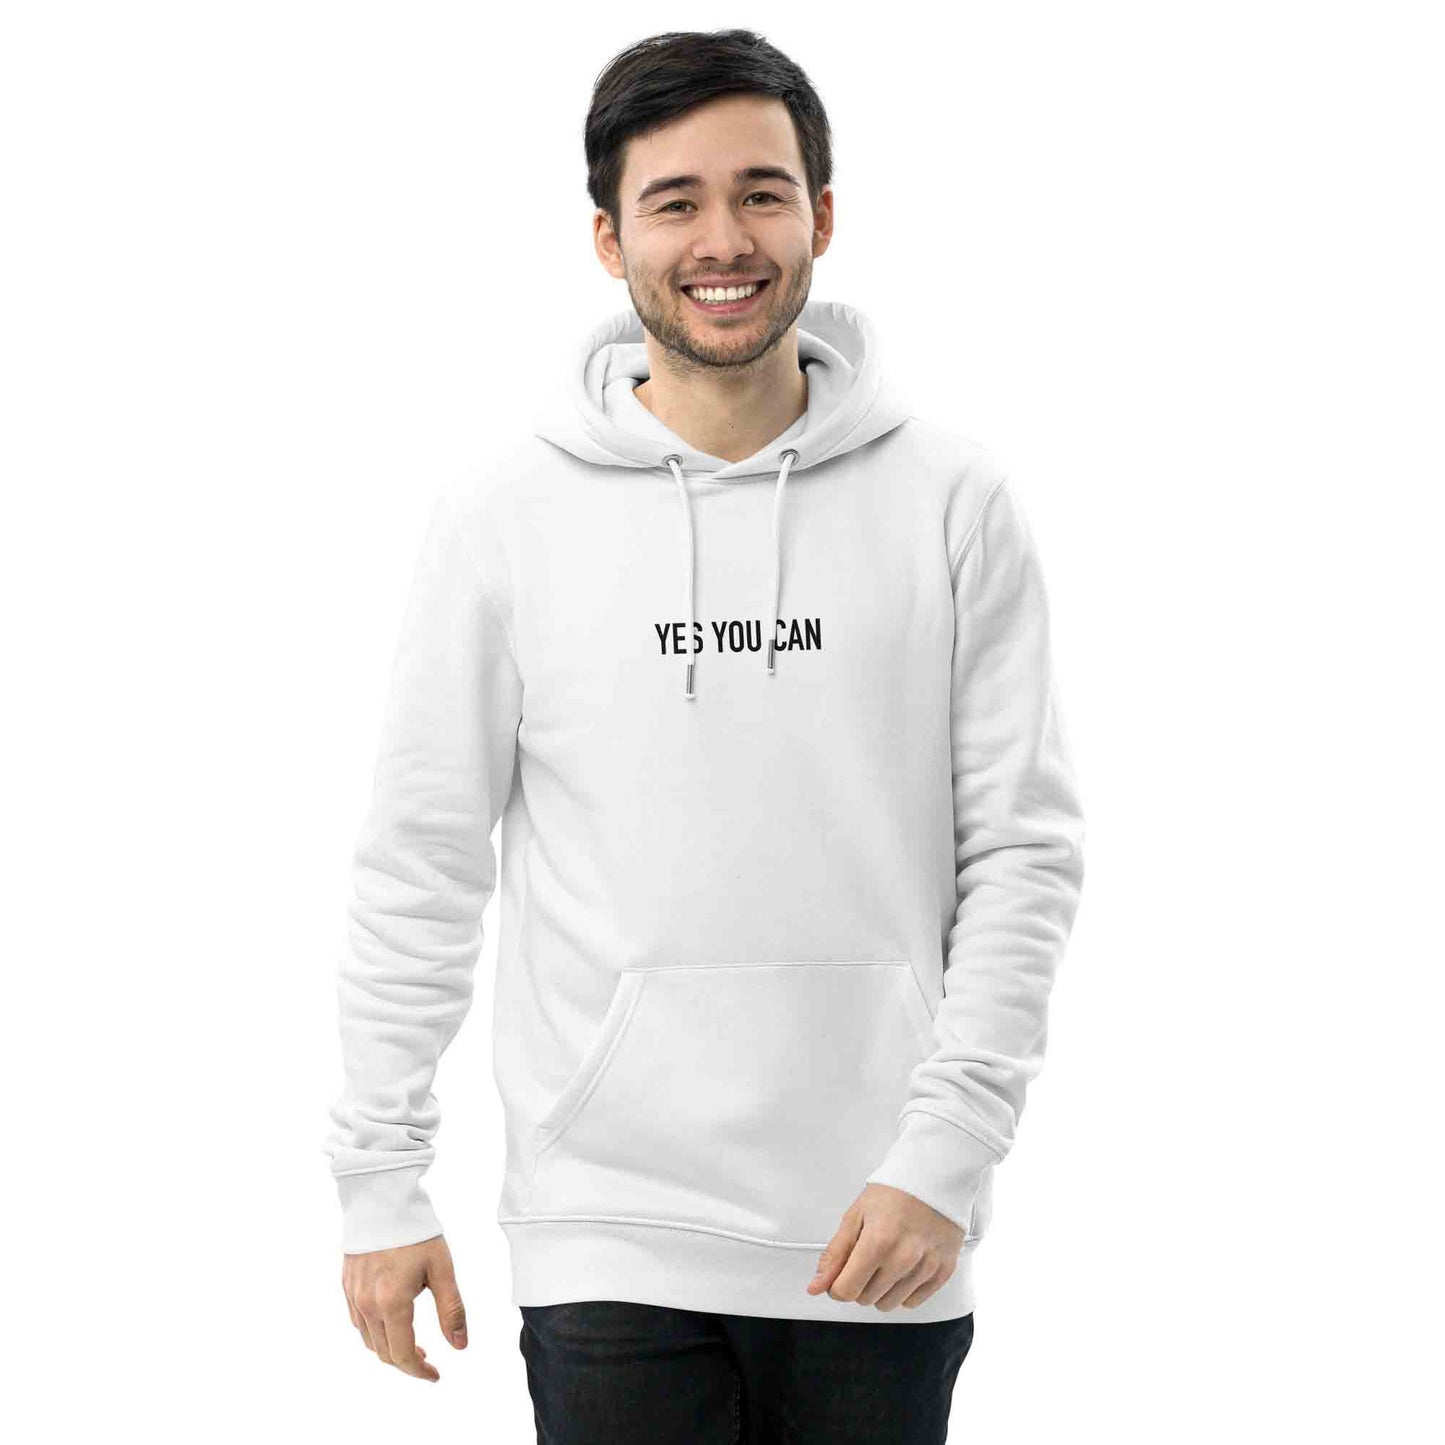 Men white organic cotton hoodie with inspirational quote, "Yes You Can."